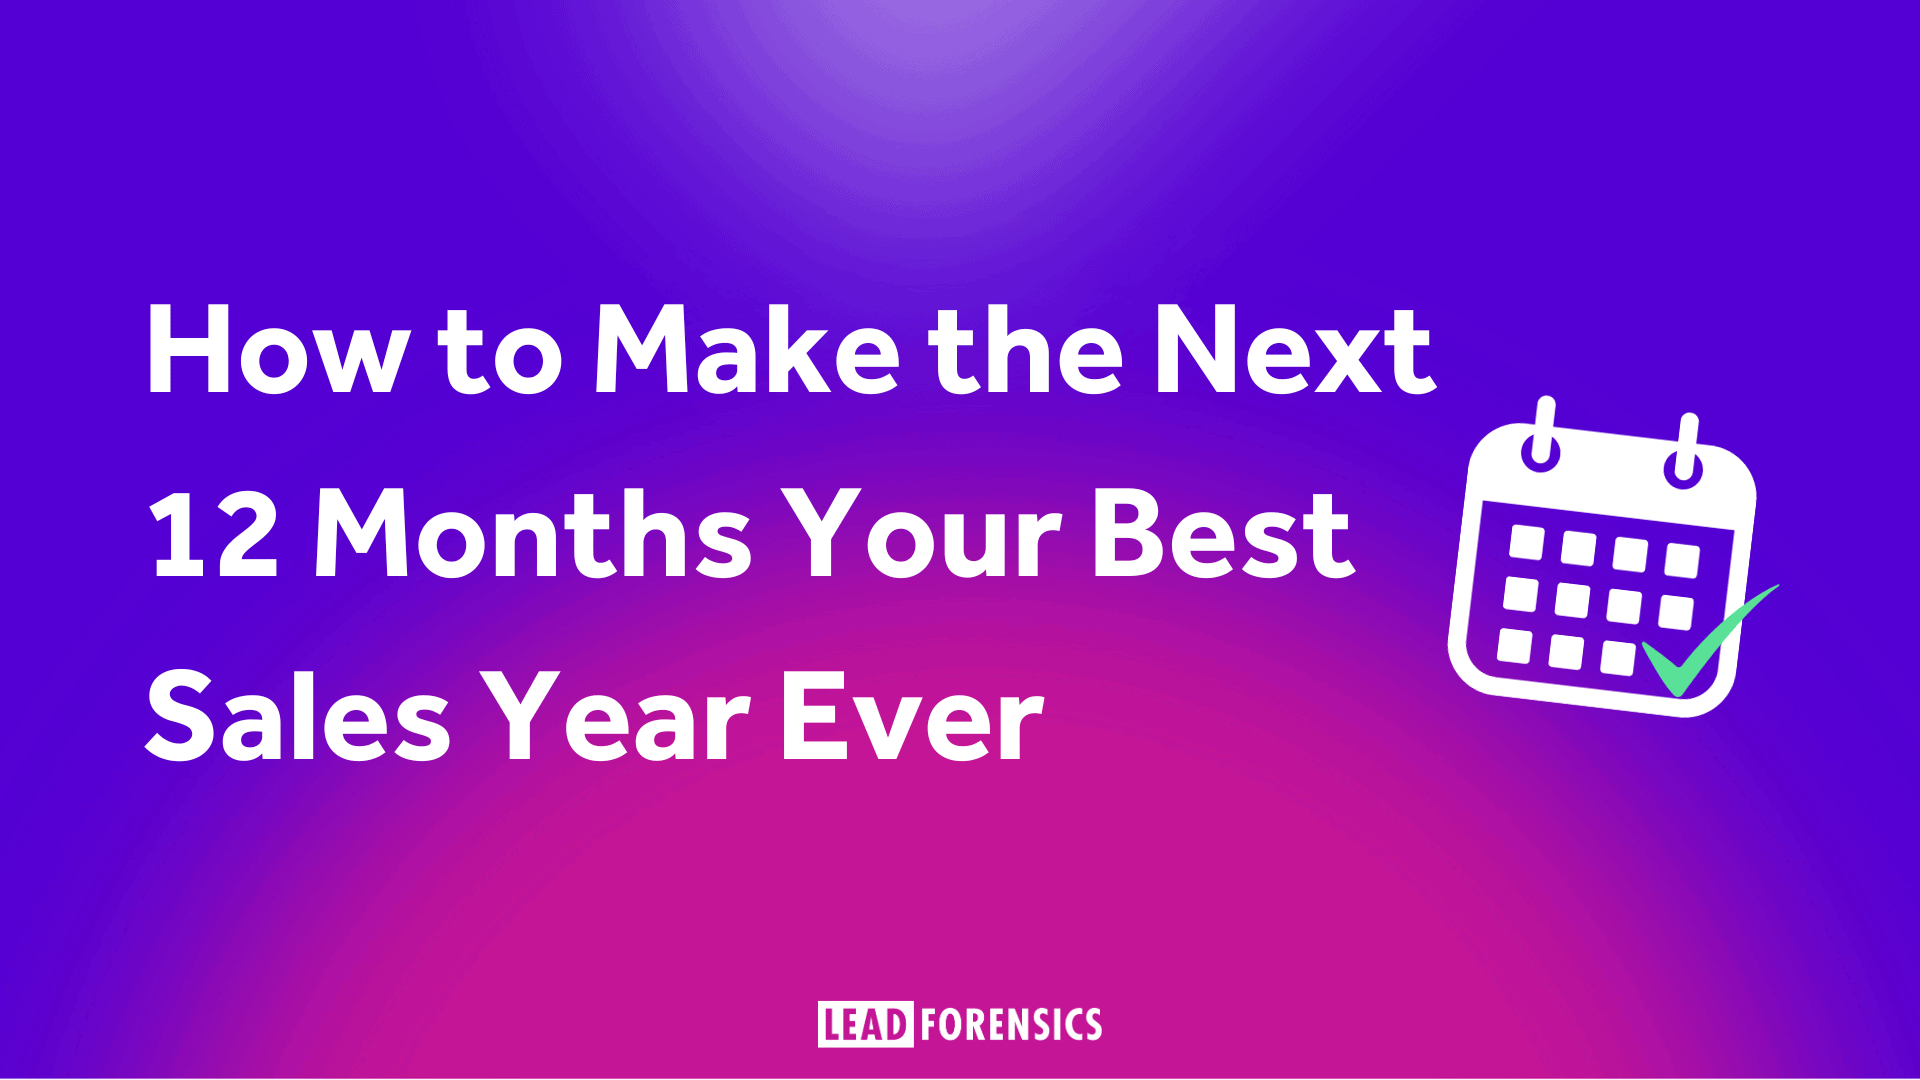 How to Make the Next 12 Months Your Best Sales Year Ever